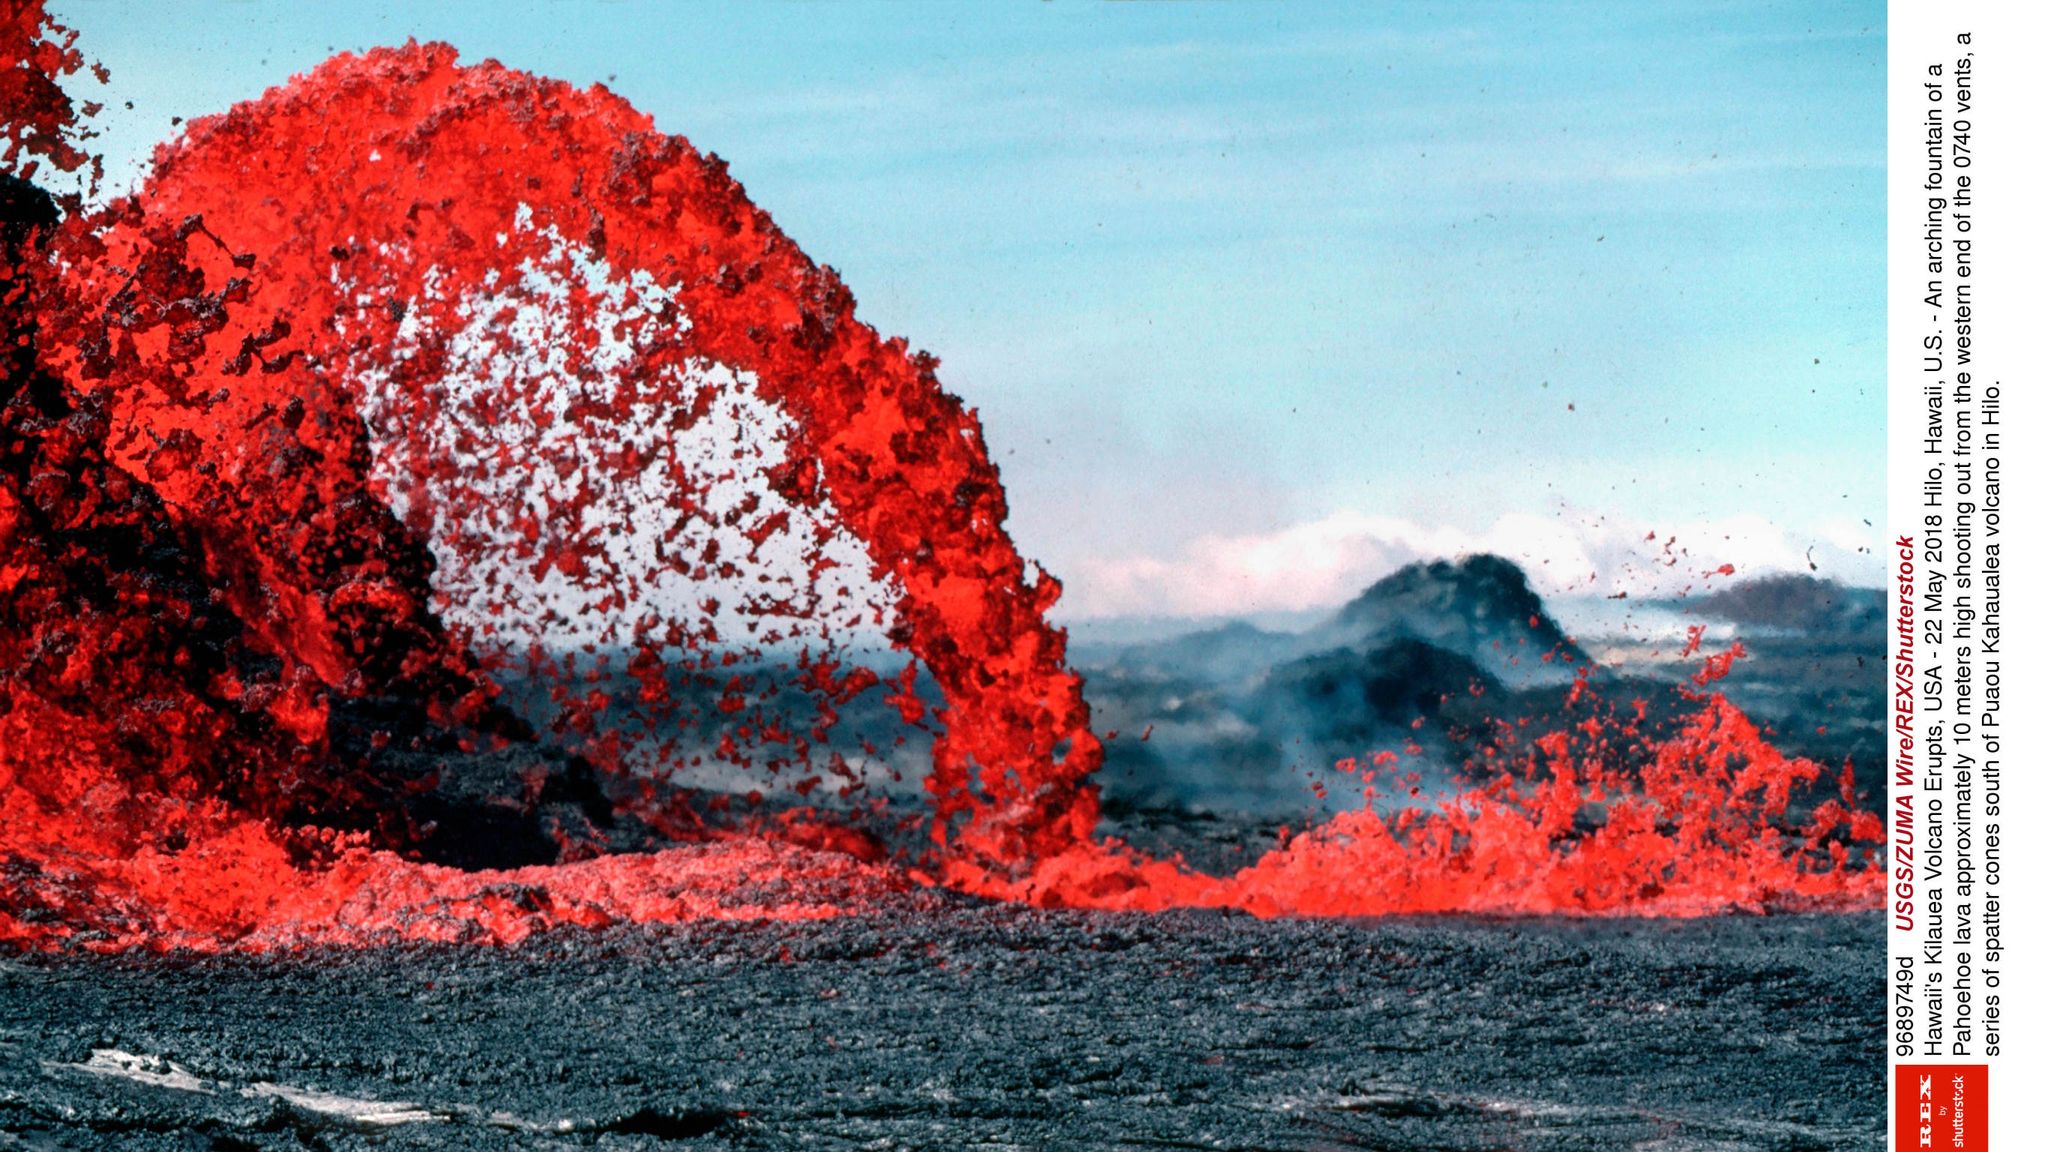 Hawaii eruption 'Pele, the goddess of fire and volcanoes, is showing